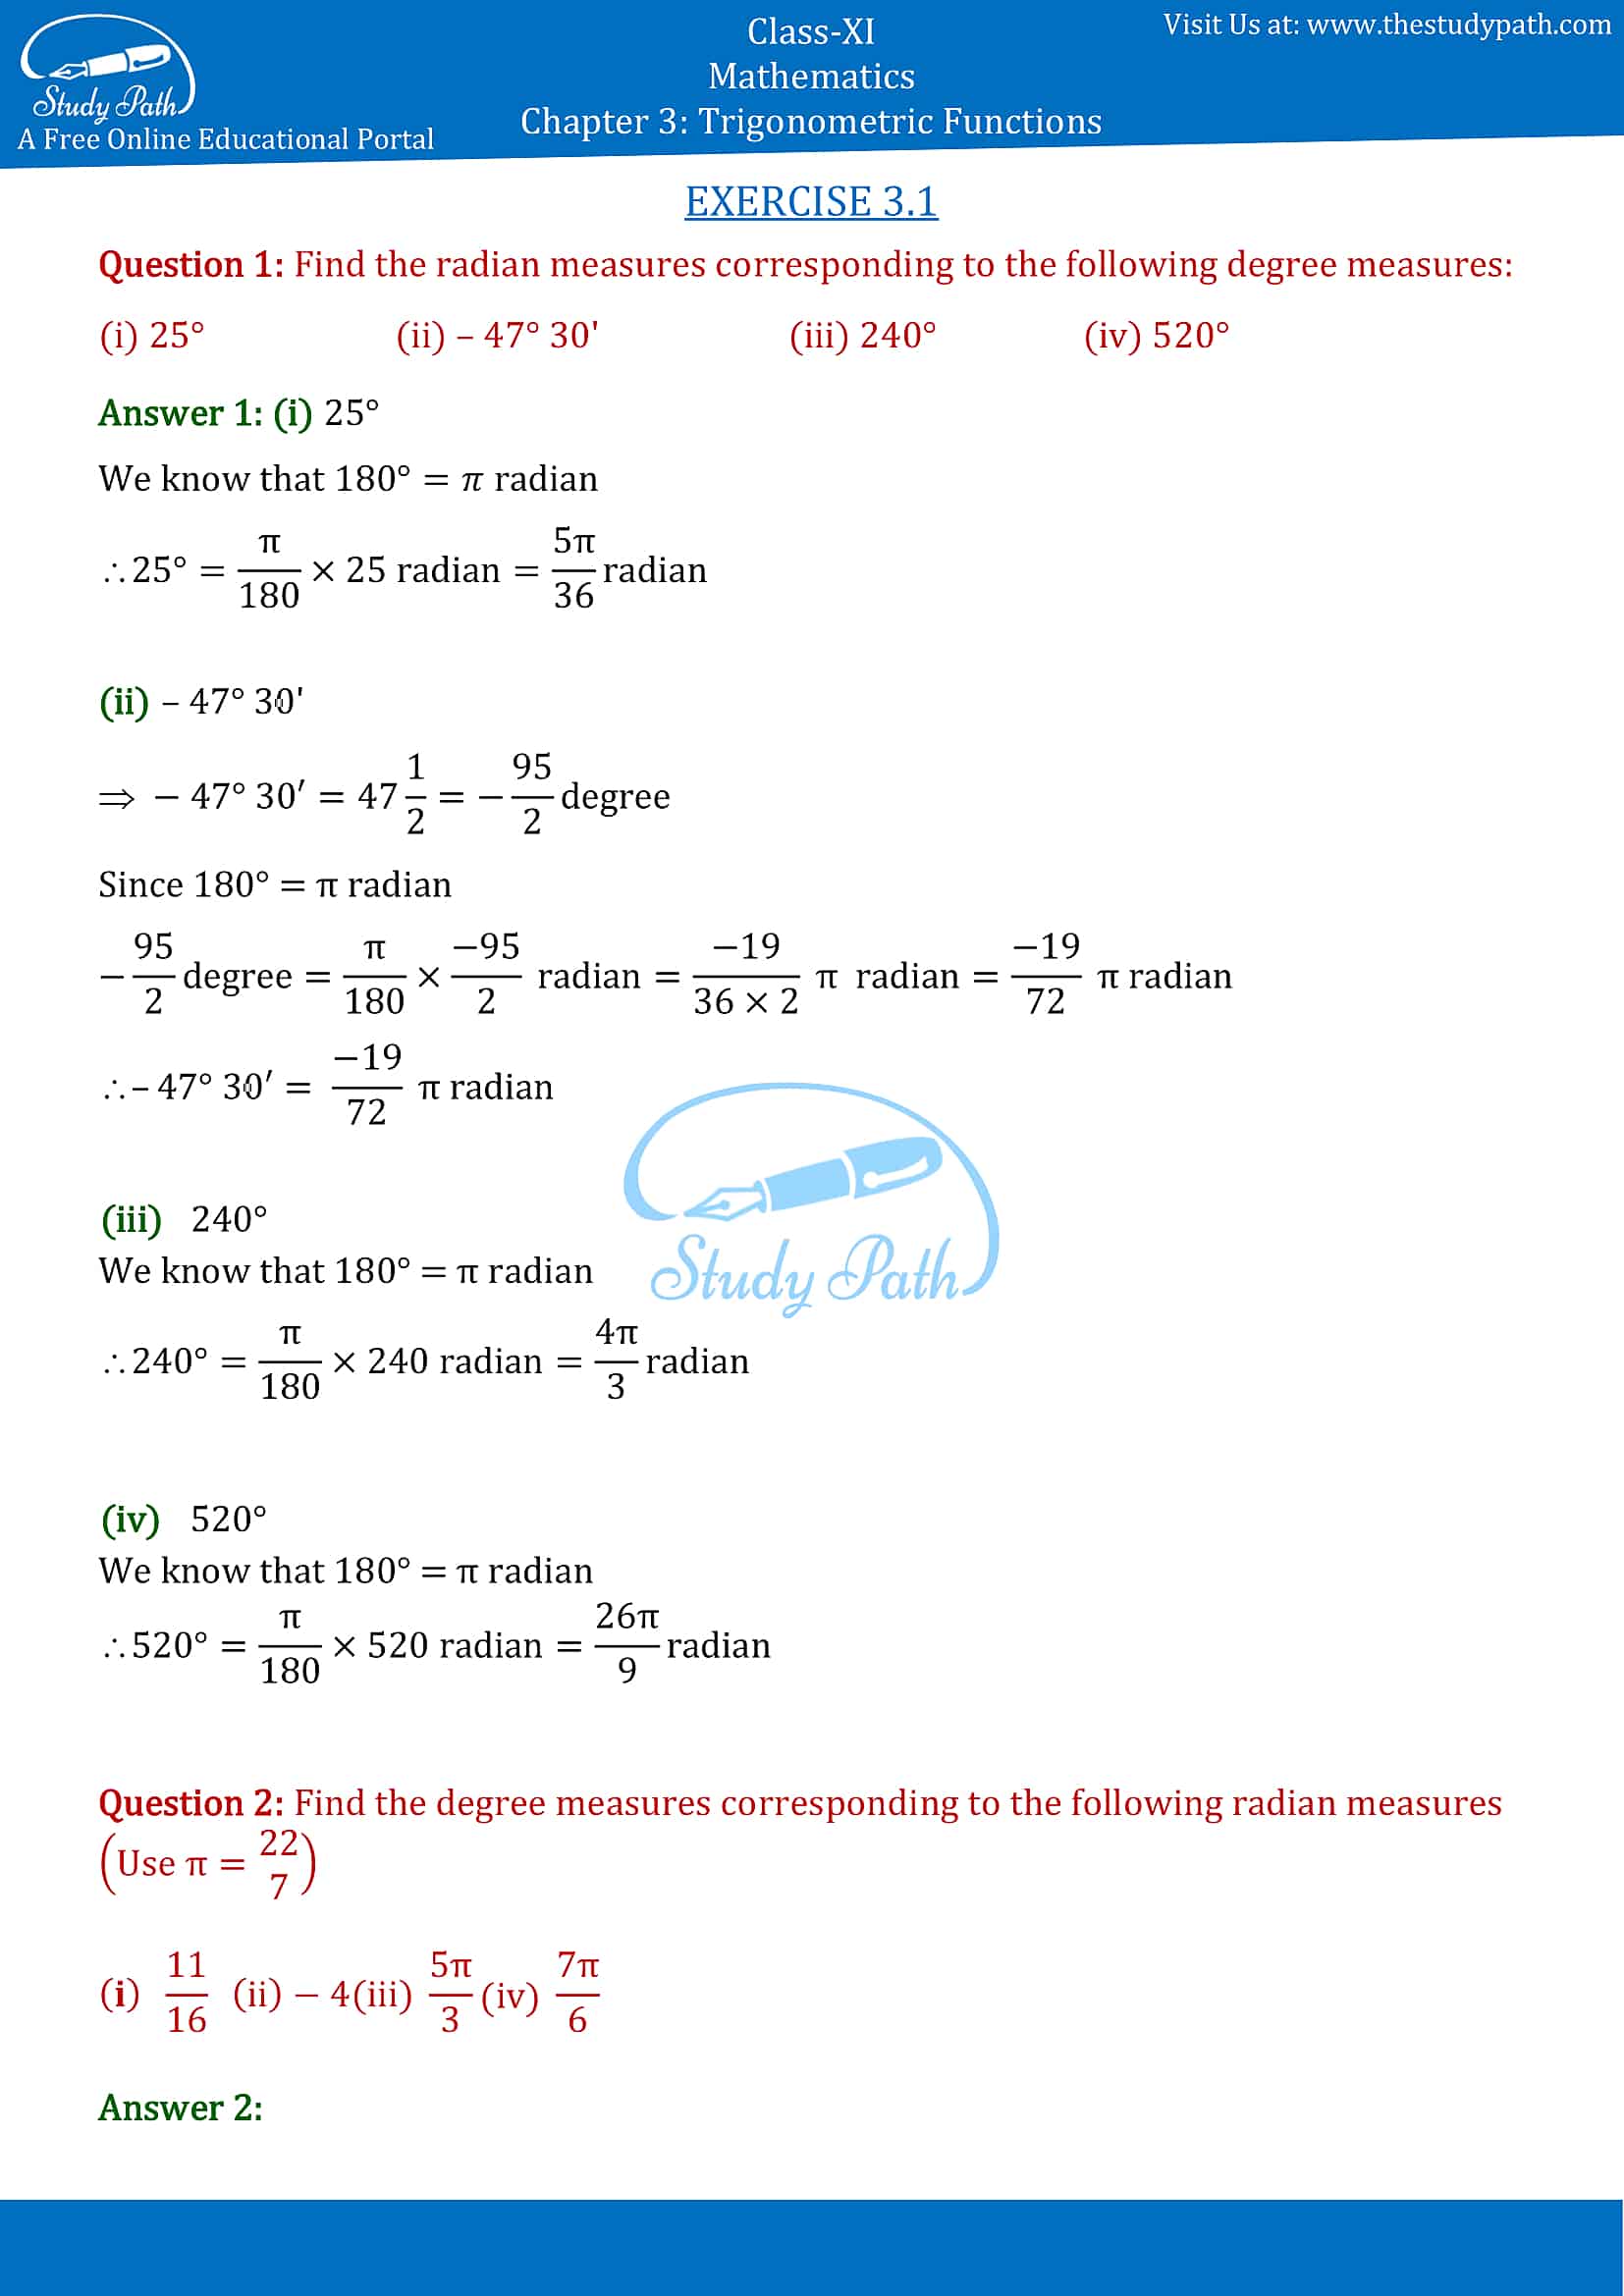 NCERT Solutions for Class 11 Maths Chapter 3 Trigonometric Functions Exercise 3.1